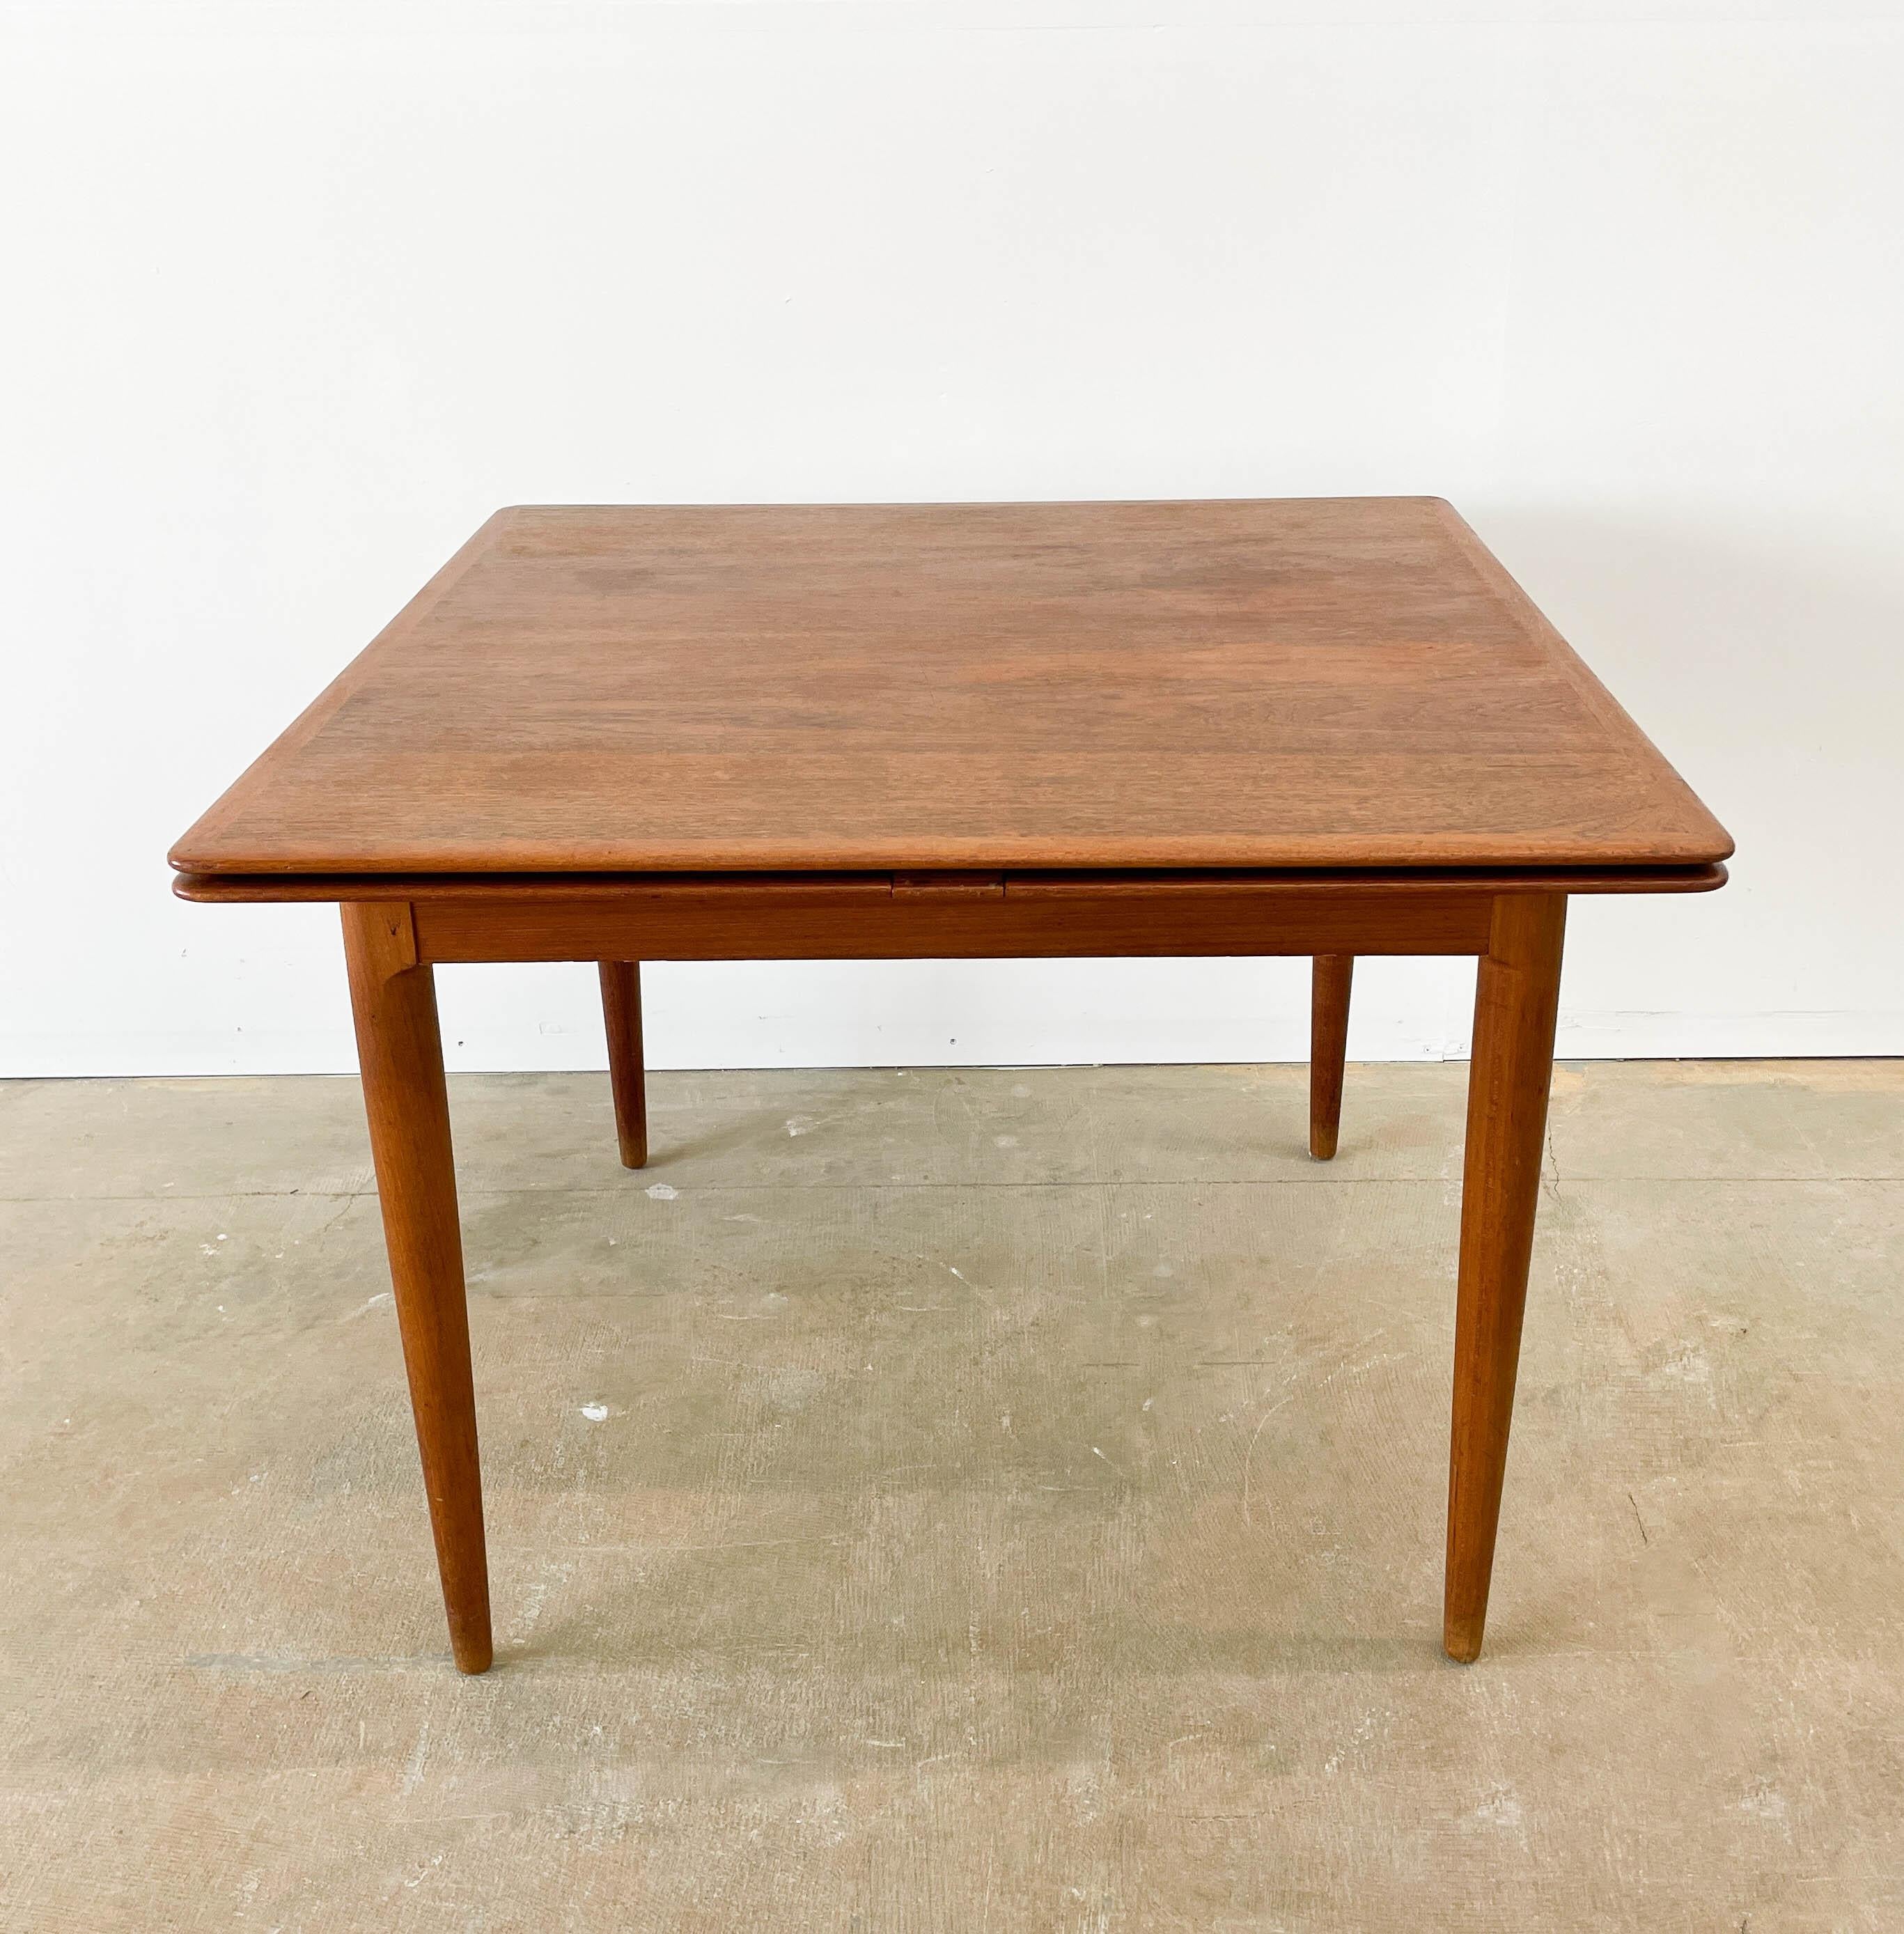 Imported by Morreddi in the 1960s, this Danish Mid-Century Modern teak table expands from a square shape to a larger rectangle. When fully expanded, the table can seat 6-8 people. The pull-out leaves boast recessed handles, and the leaves are stored